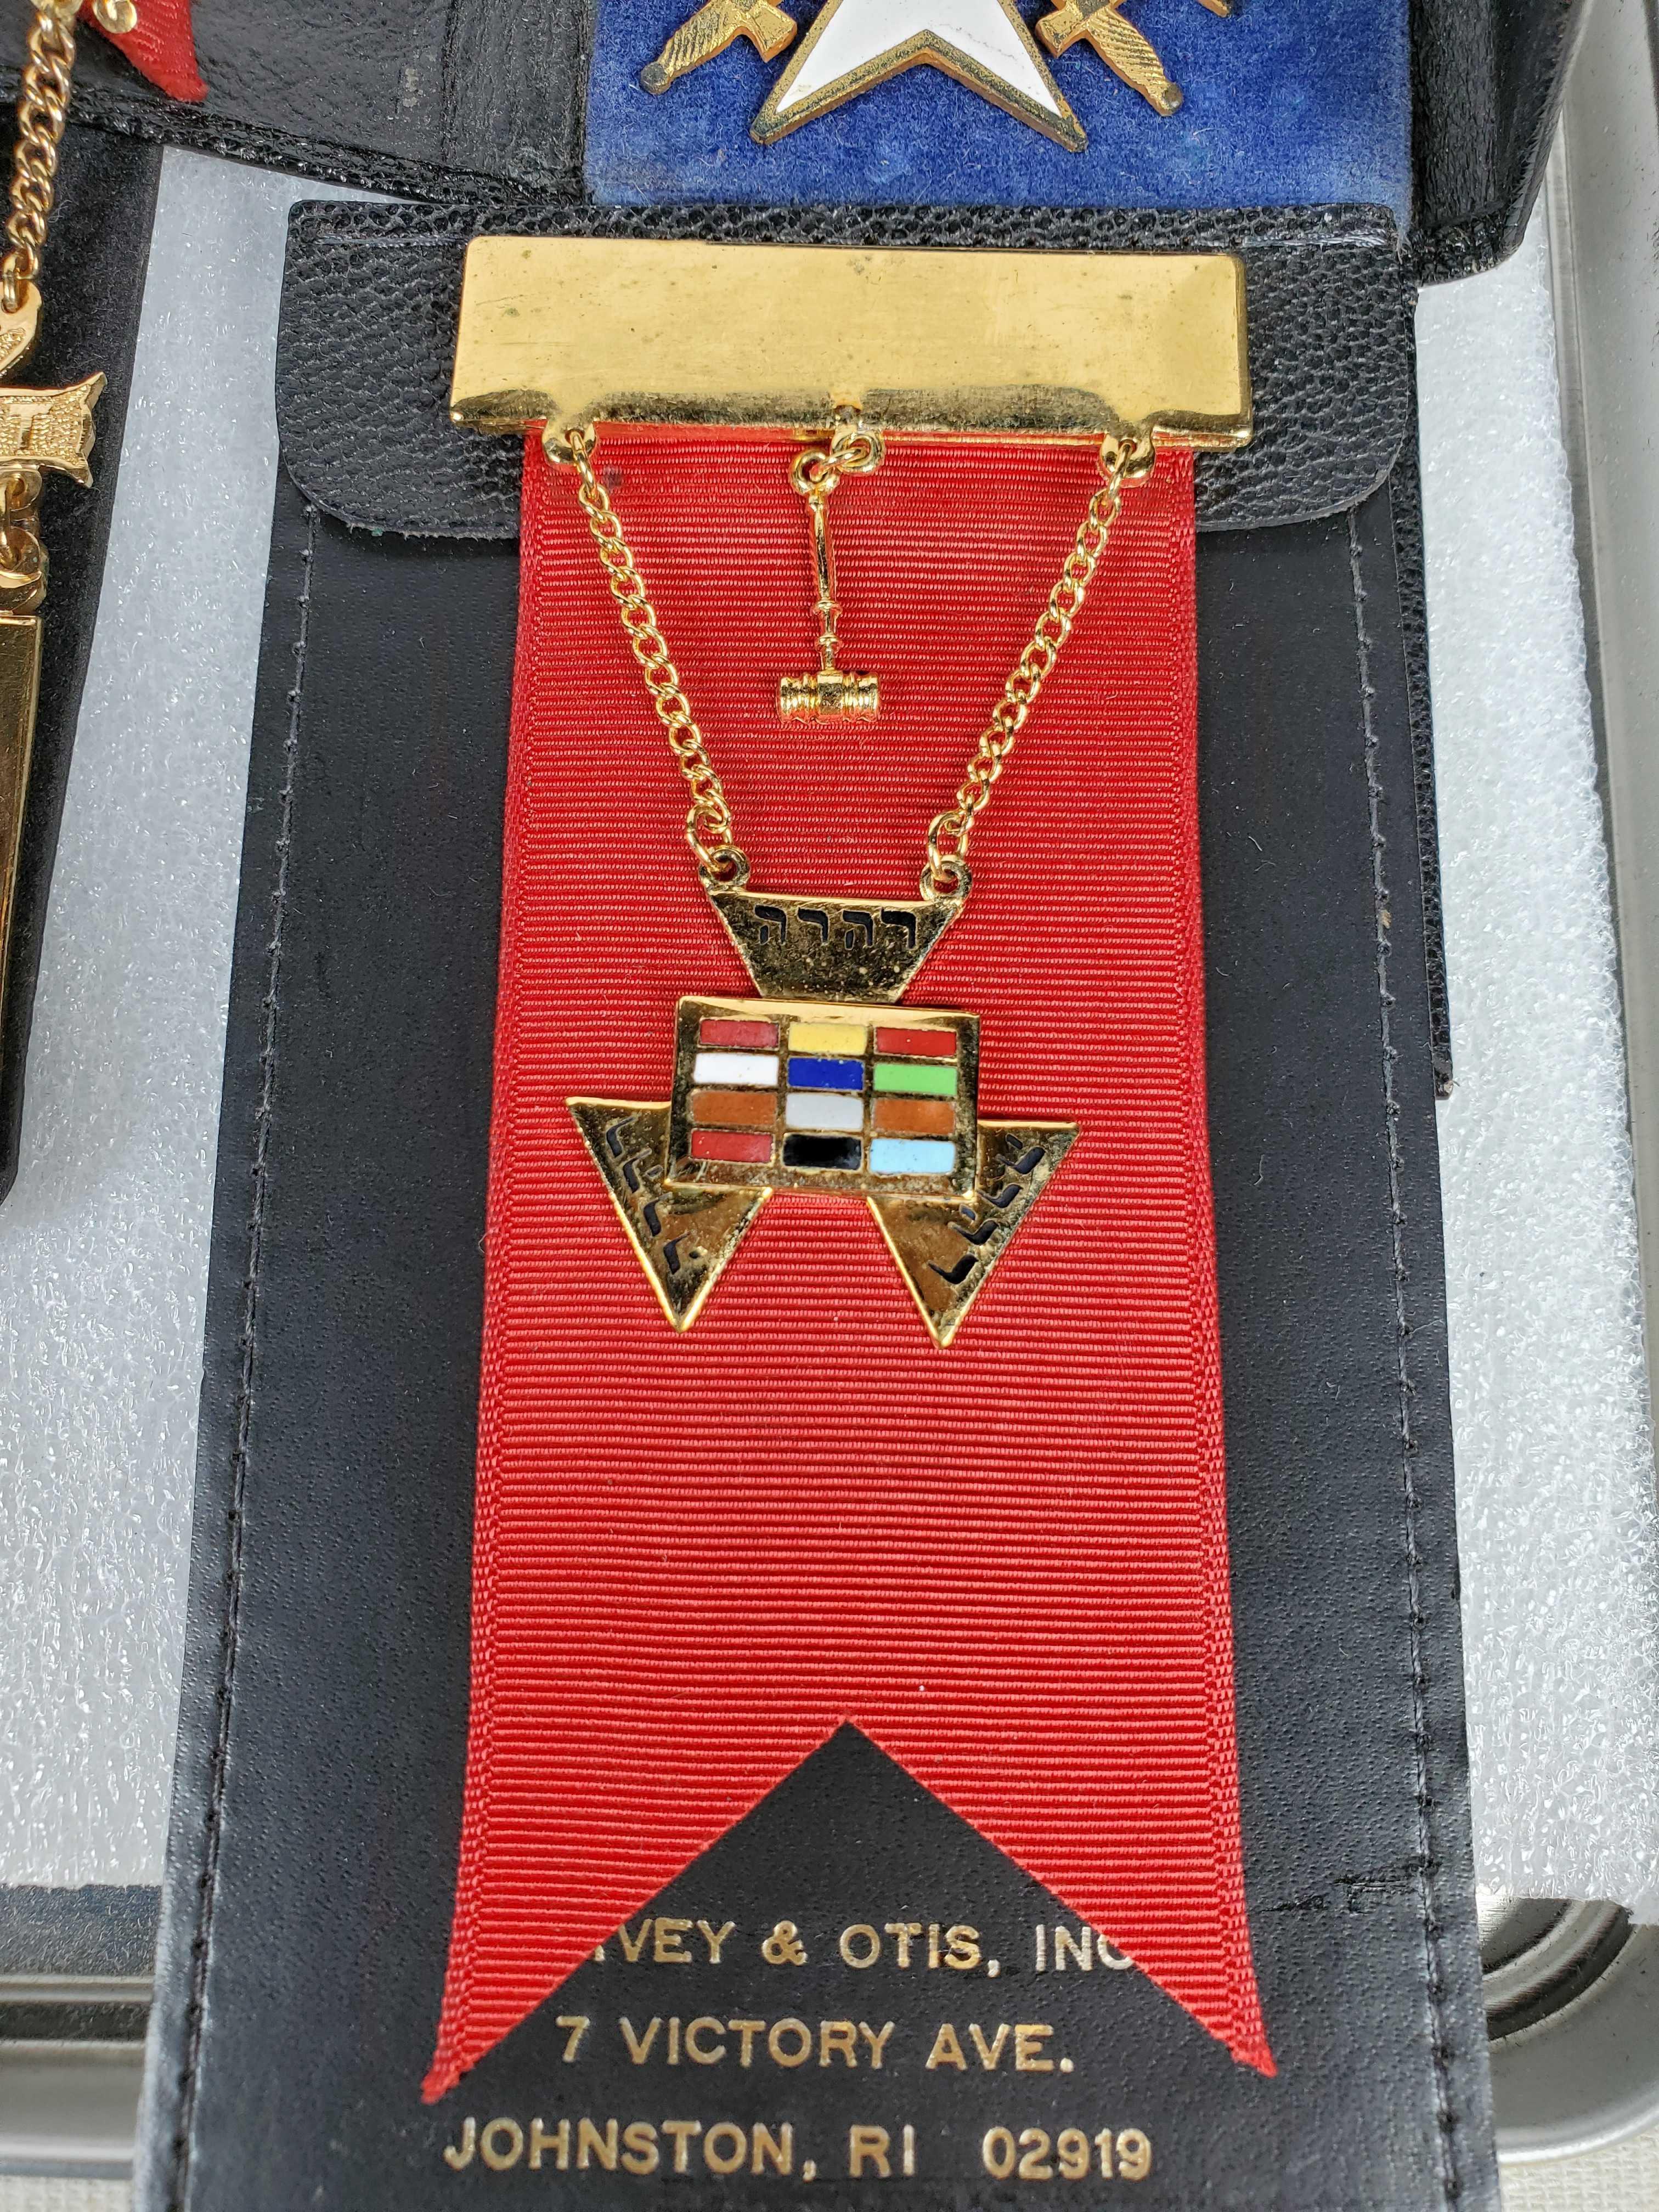 Collection of Vintage Masonic & Other Fraternal Medals